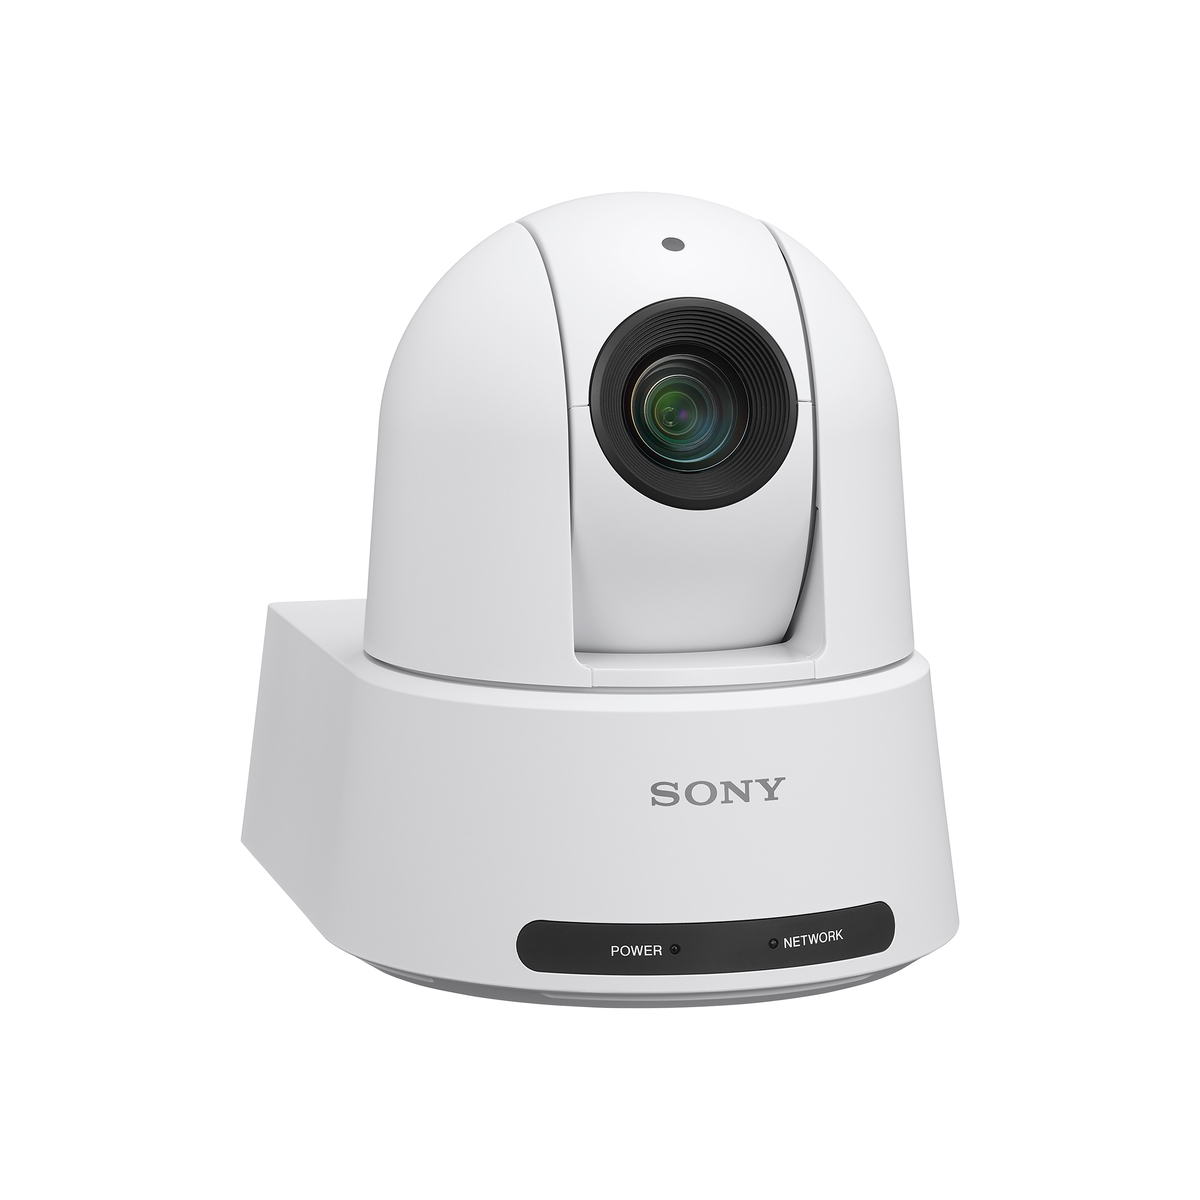 Sony SRG-A40 side - white